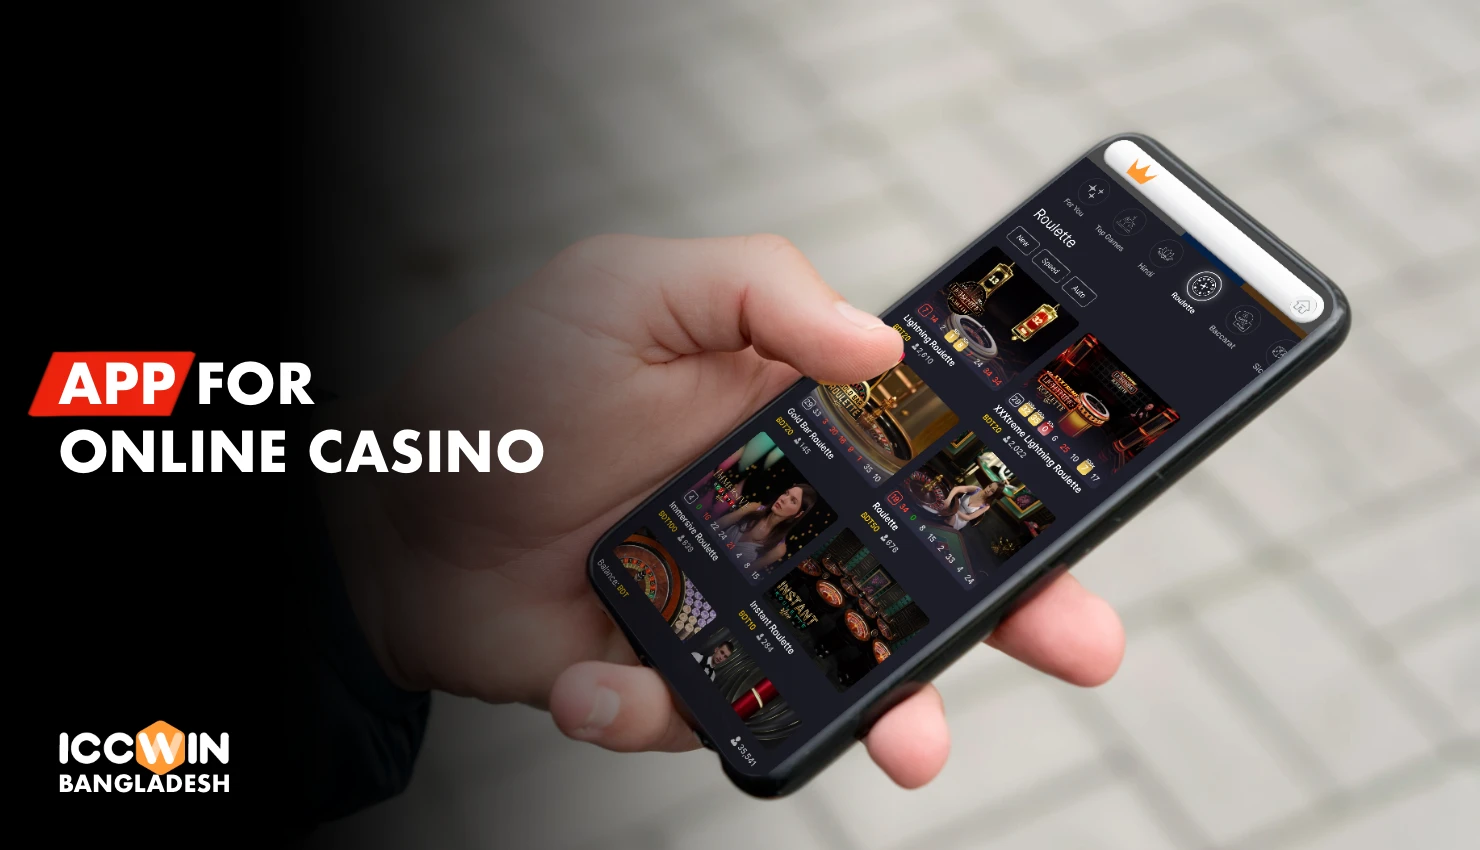 The Iccwin app also includes a casino section with slots as well as live dealer games